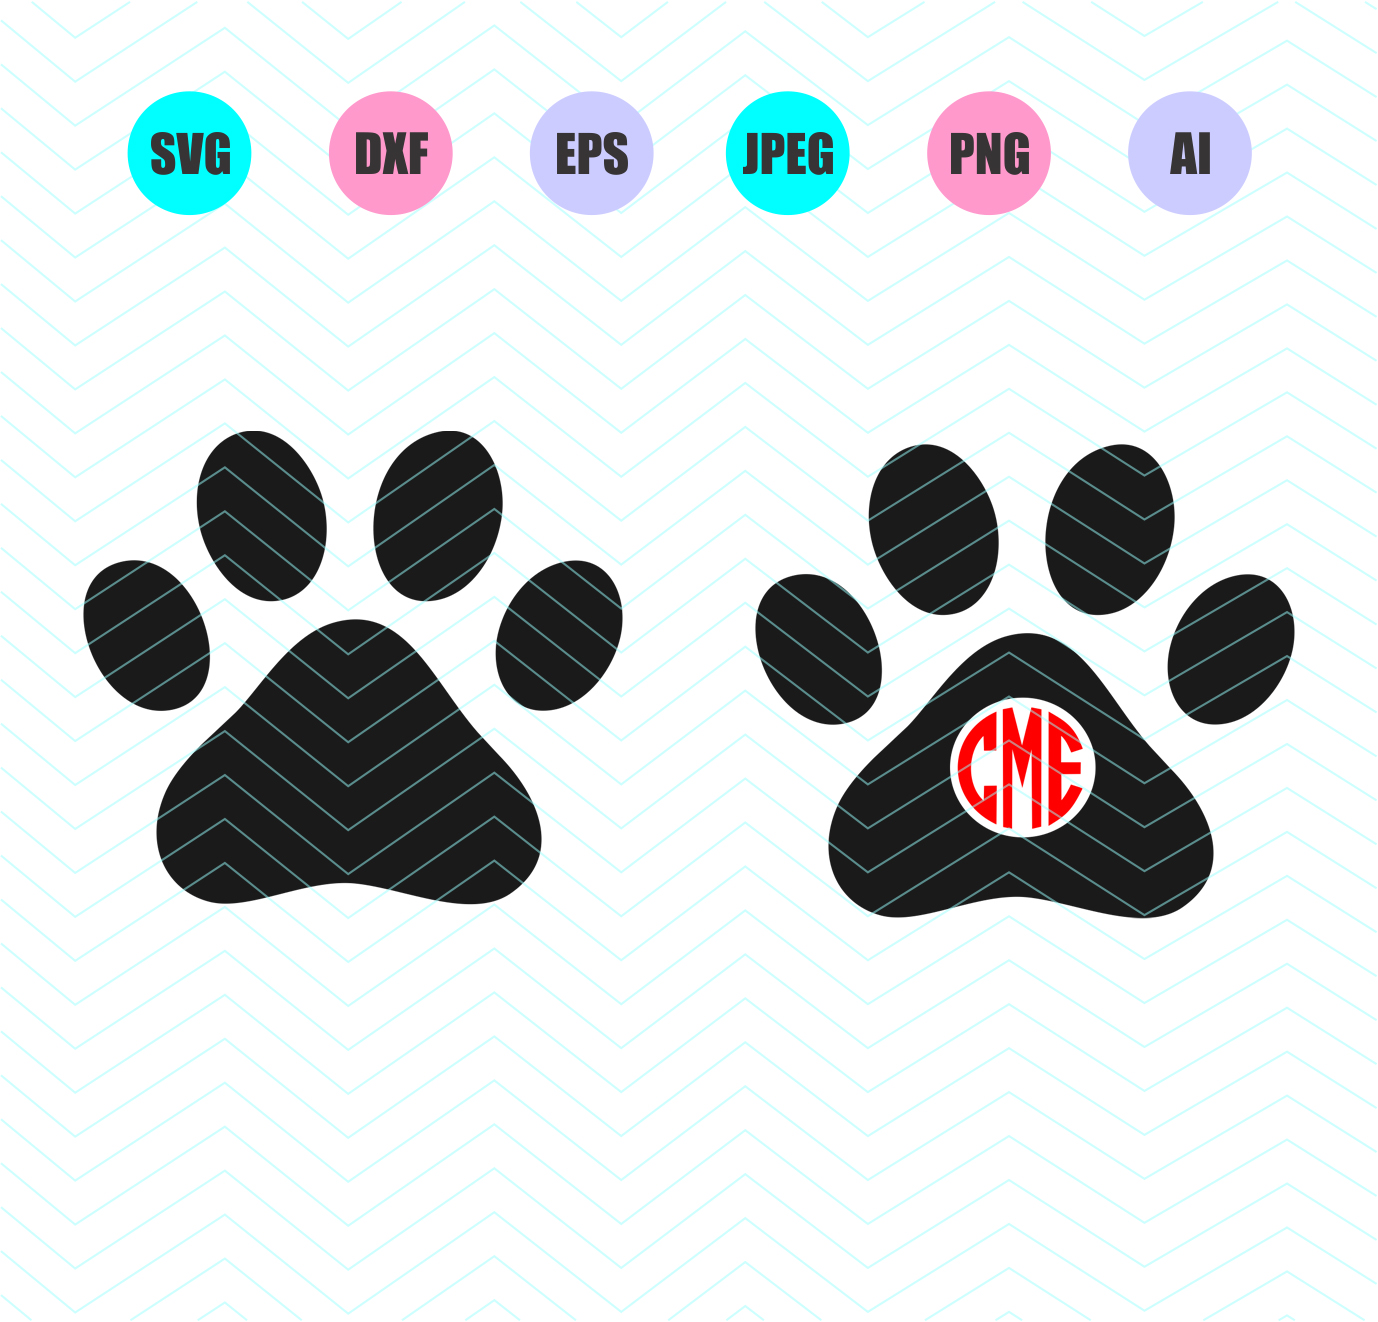 Download Dog Paw Svg Dxf Eps Png Jpg Ai Cut Vector File Silhouette ...